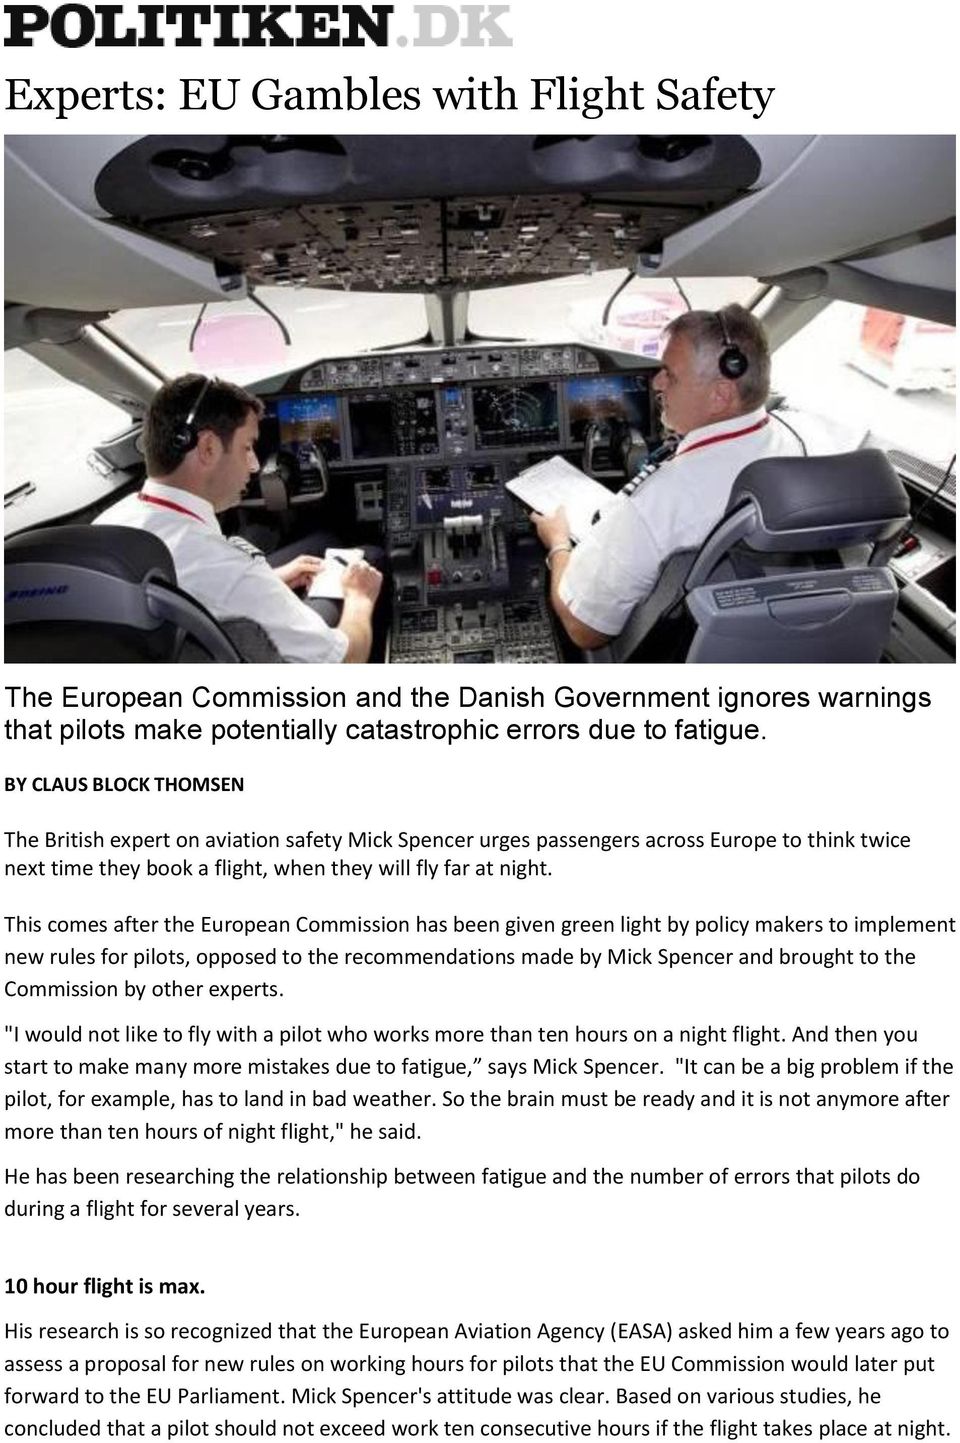 This comes after the European Commission has been given green light by policy makers to implement new rules for pilots, opposed to the recommendations made by Mick Spencer and brought to the